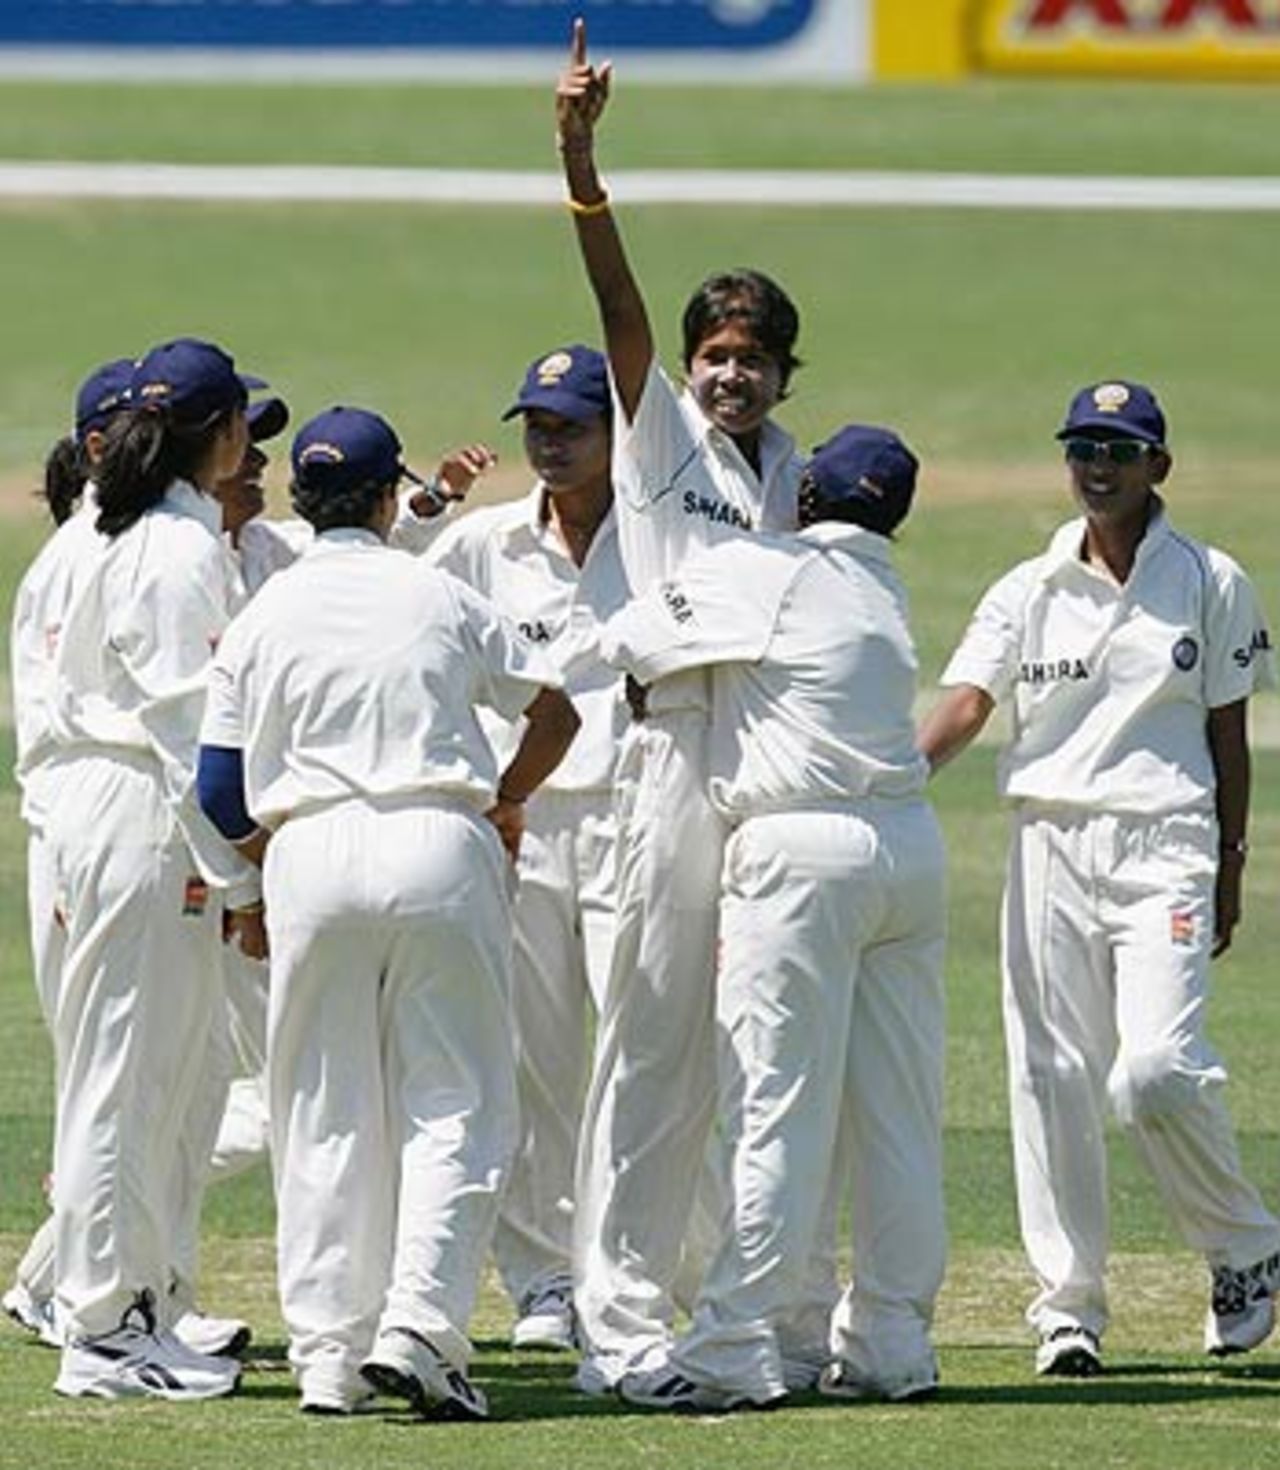 Jhulan Goswami is congratulated by her team-mates after taking a wicket ,Australia Women v India Women, Only Test, Adelaide Oval, February 18 2006